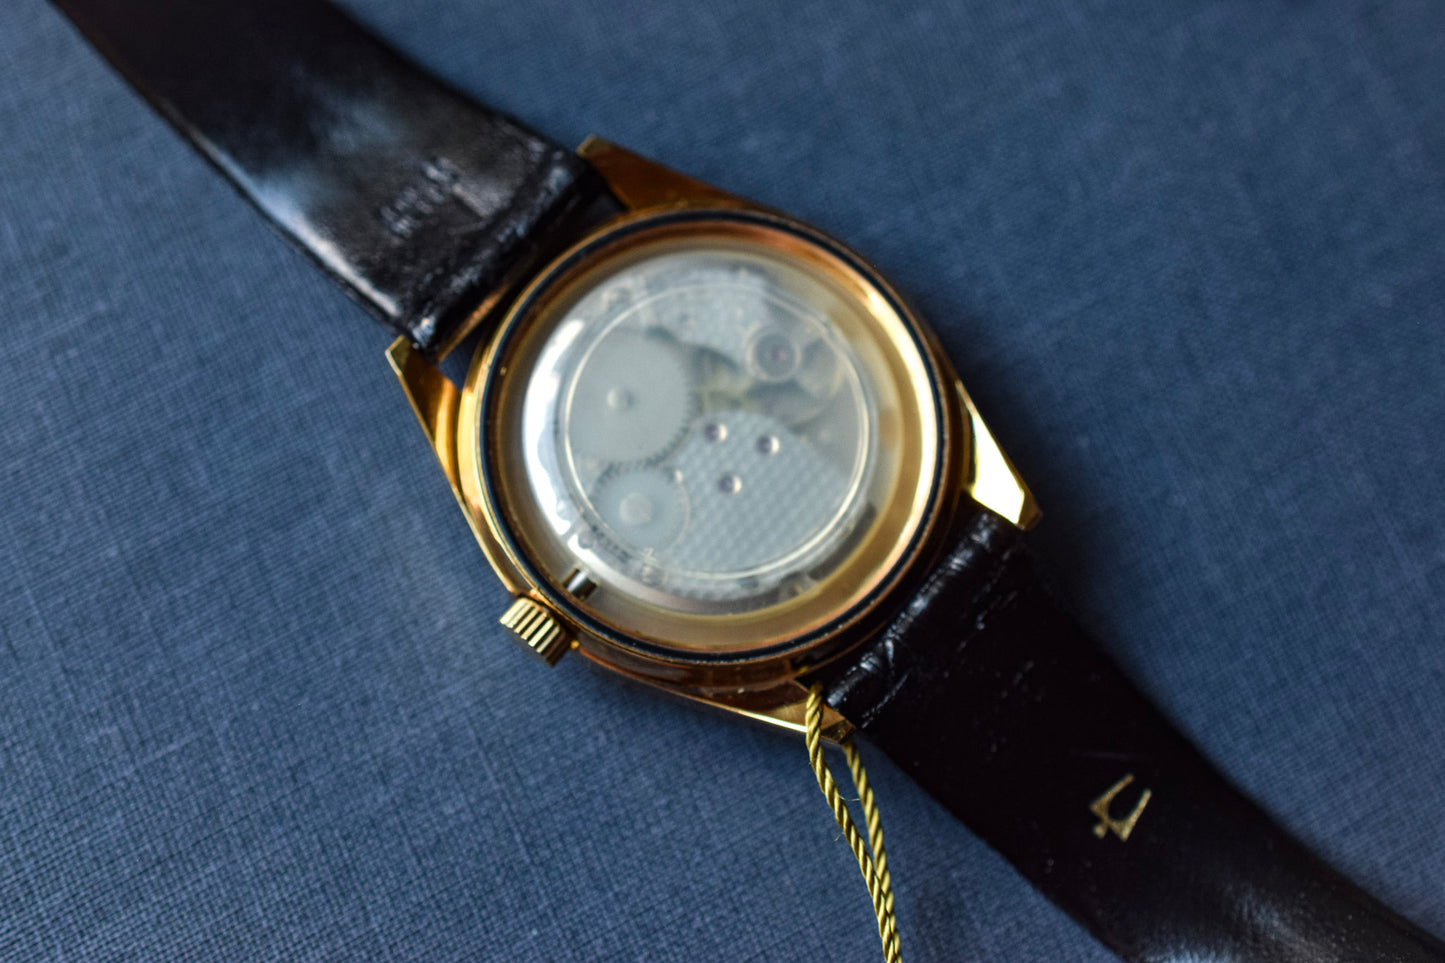 New Old Stock 1981 Mechanical Caravelle Watch